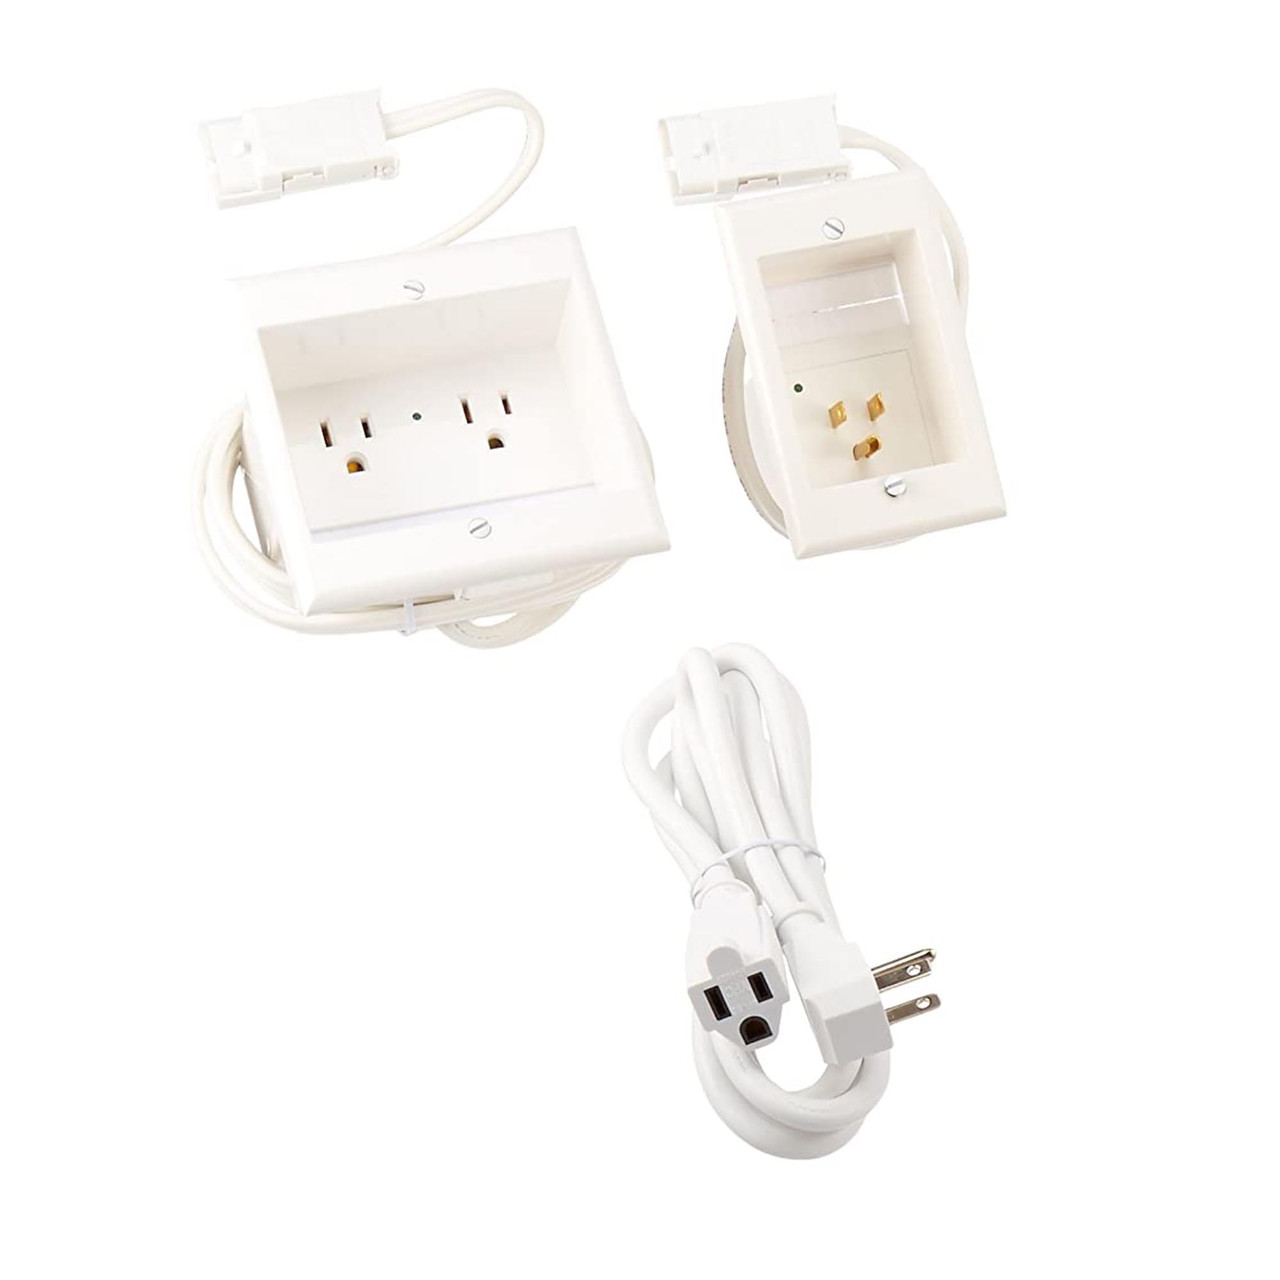 PowerBridge ONE-CK Recessed In-Wall Cable Management System with